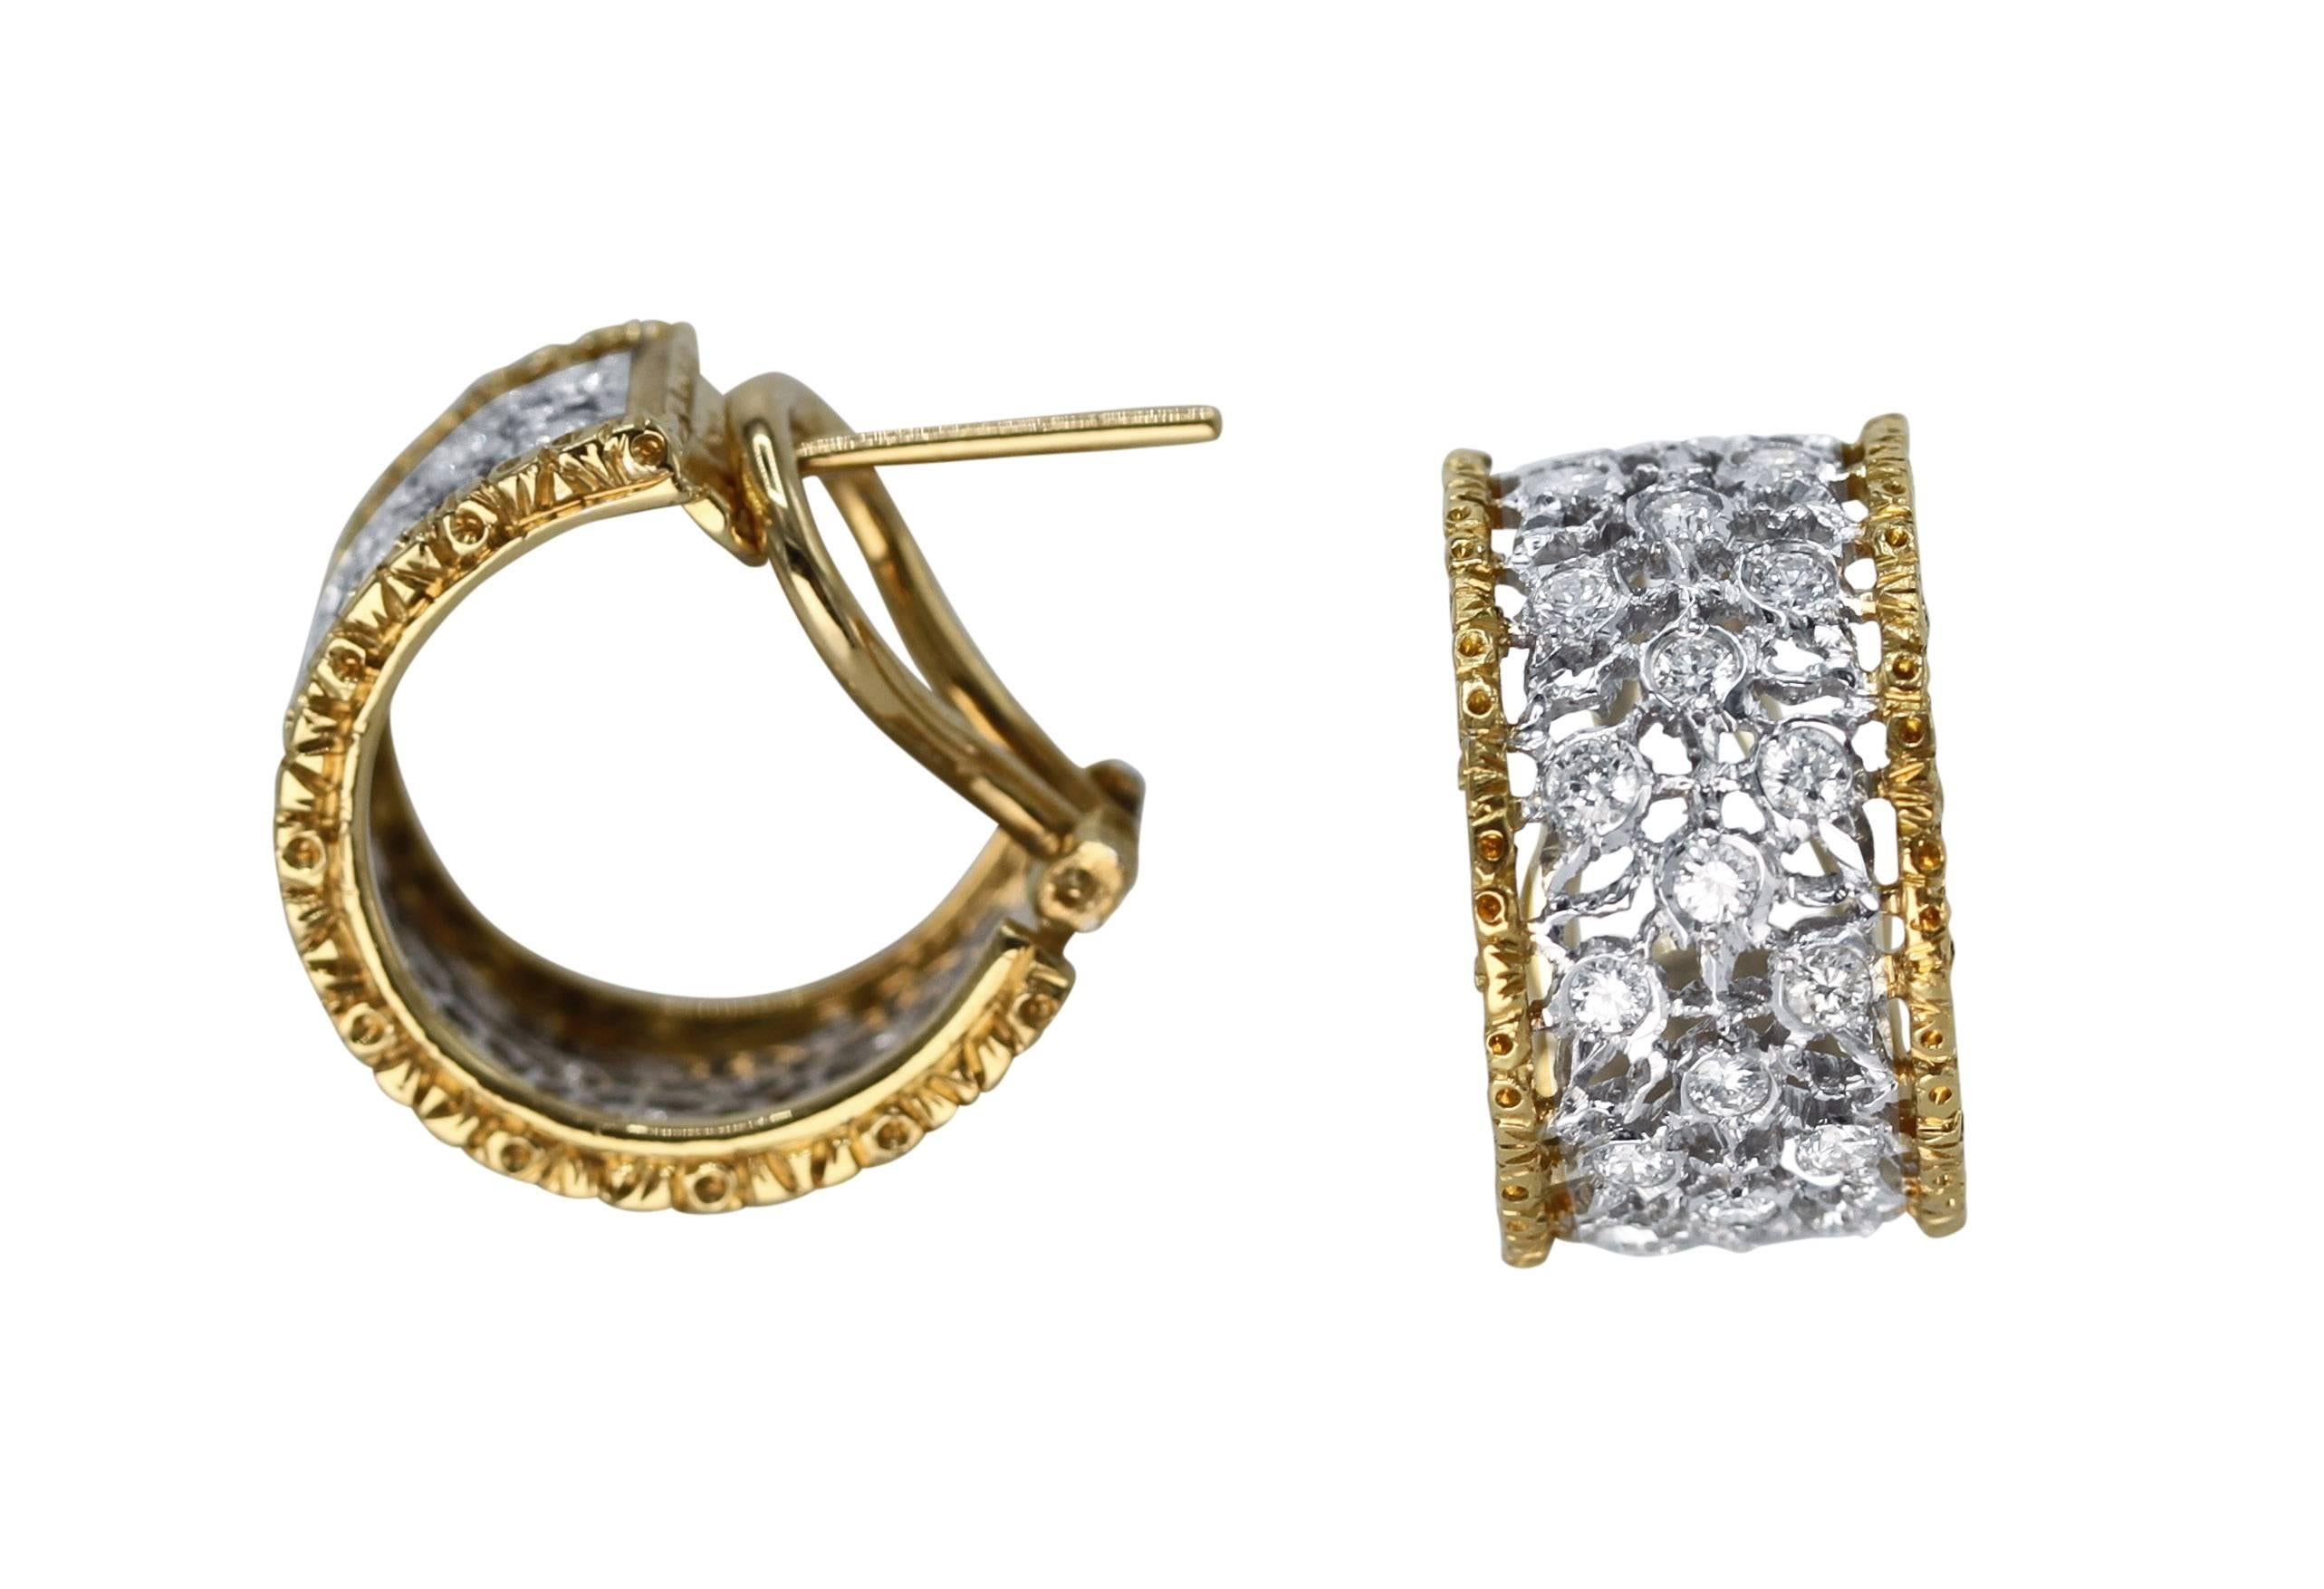 A pair of 18 karat two-tone gold and diamond hoop earclips by Buccellati, Italy, designed as half-hoops of openwork pattern set with 46 round diamonds weighing approximately 0.90 carat, gross weight 10.0 grams, measuring 5/8 by 3/8 inch, signed M.